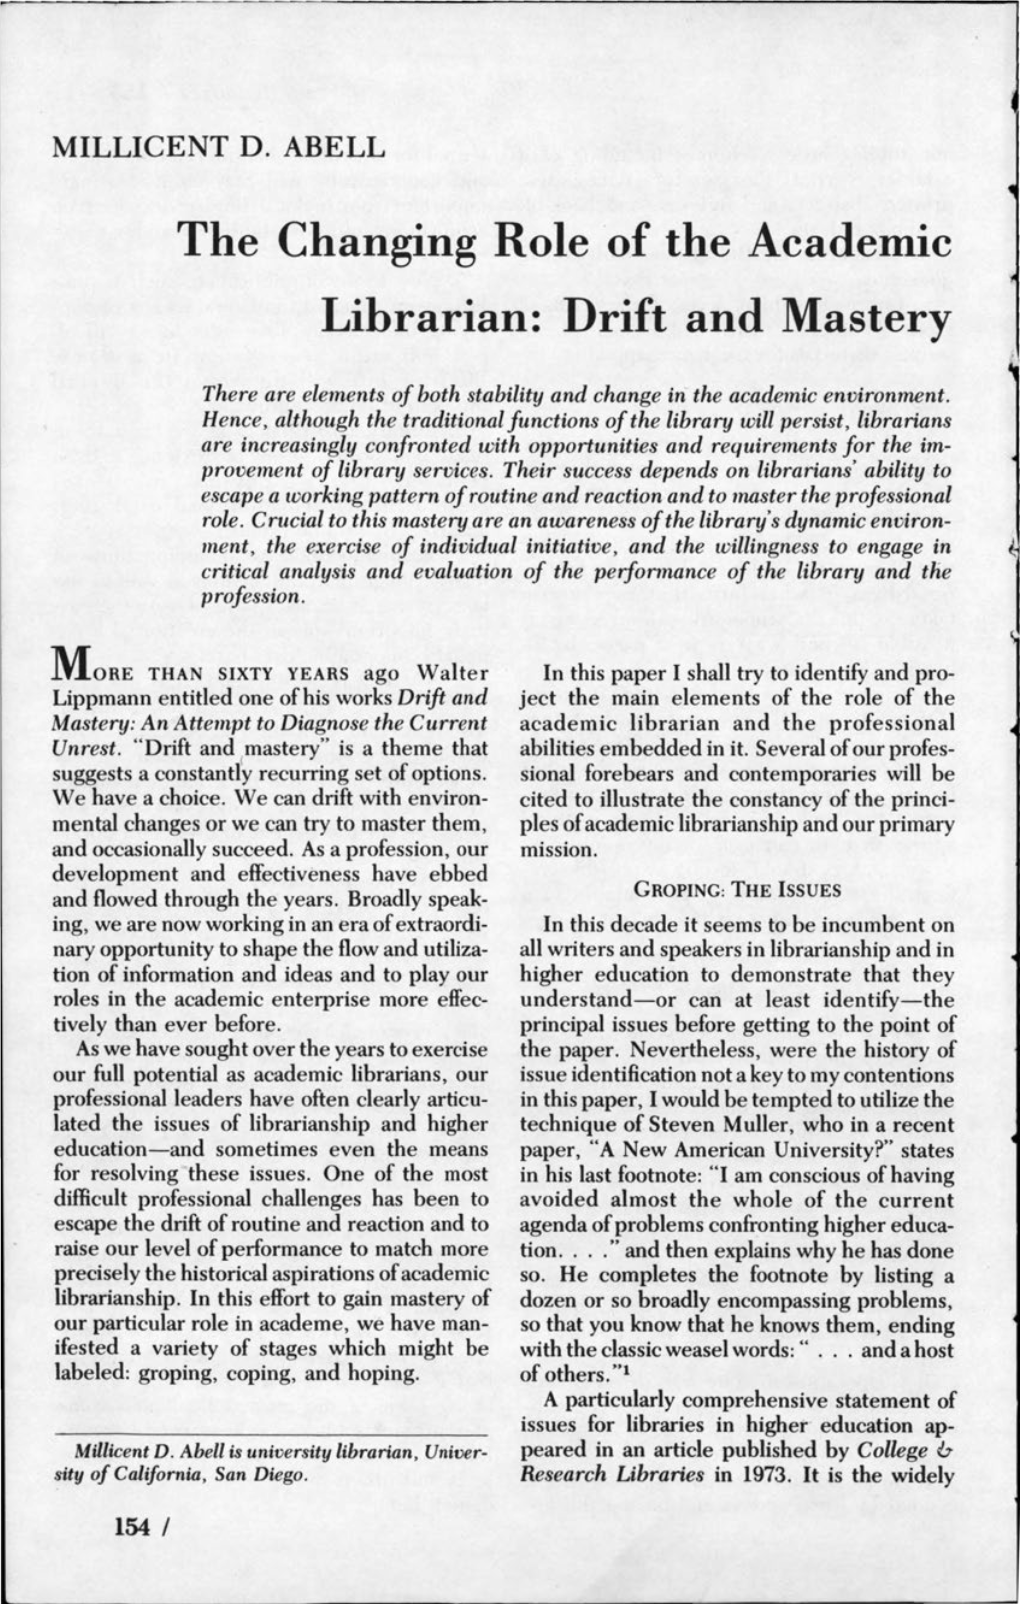 The Changing Role of the Academic Librarian: Drift and Mastery